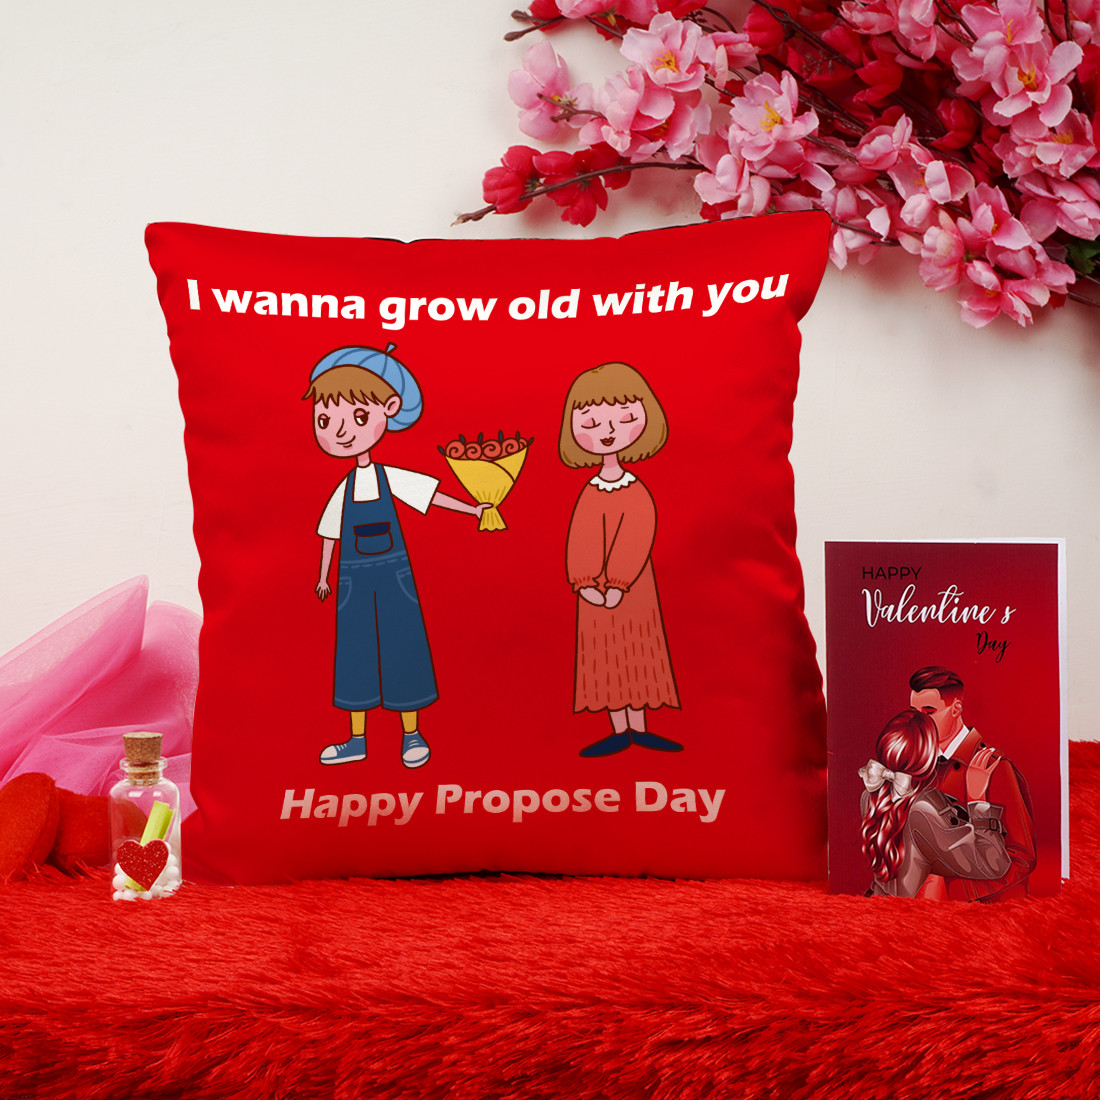 Valentines Gift | Romantic Gifts | Gifts For Him | Gift For Husband,  Boyfriend